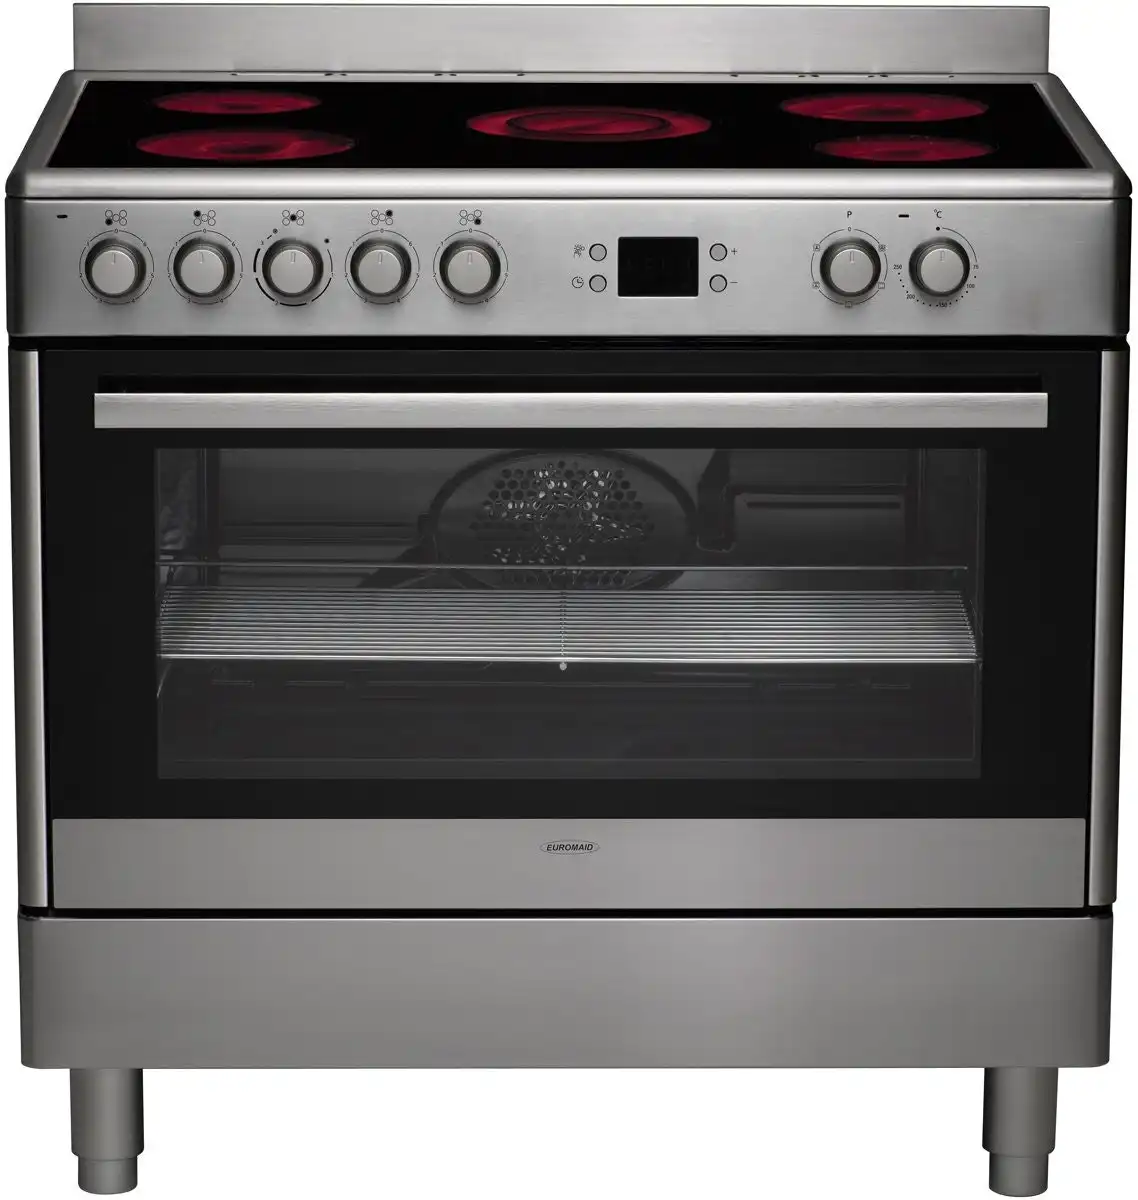 Euromaid 90cm Freestanding Electric Oven/Stove